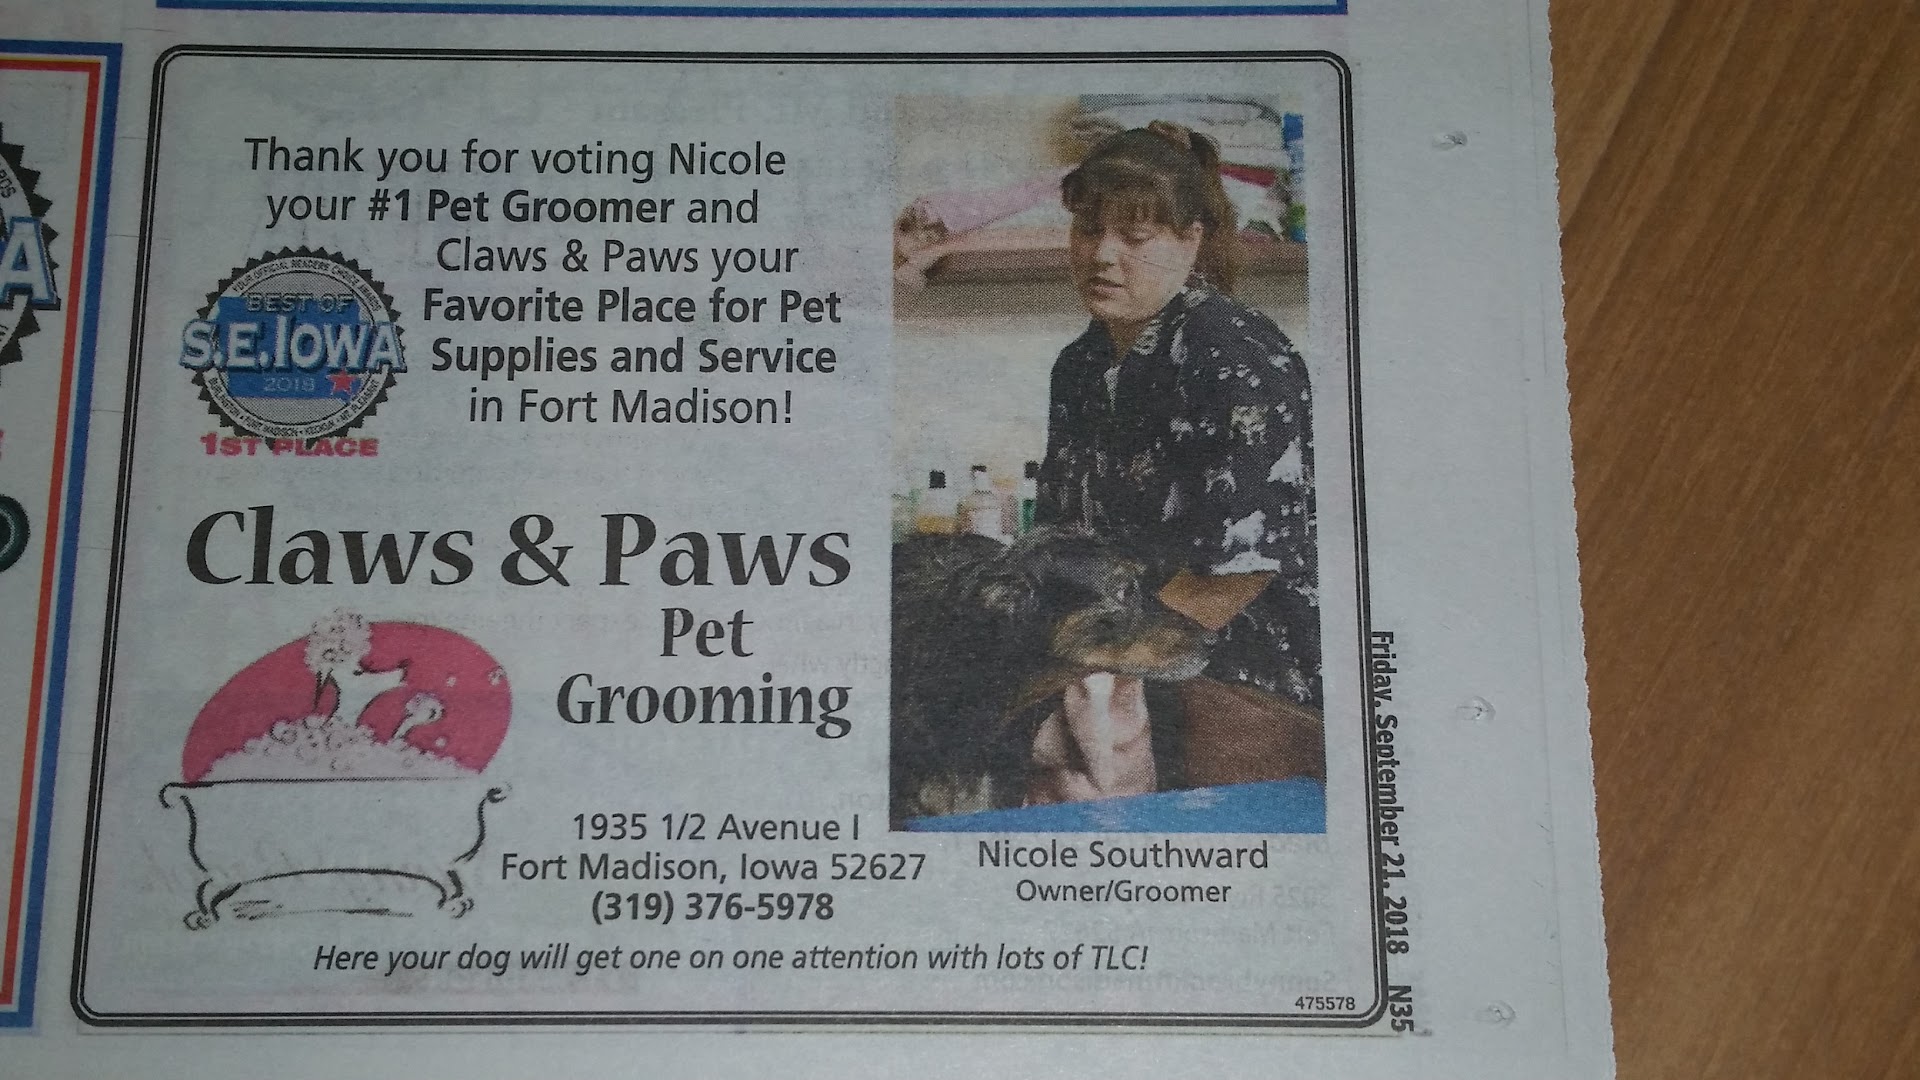 Claws & Paws Pet Grooming